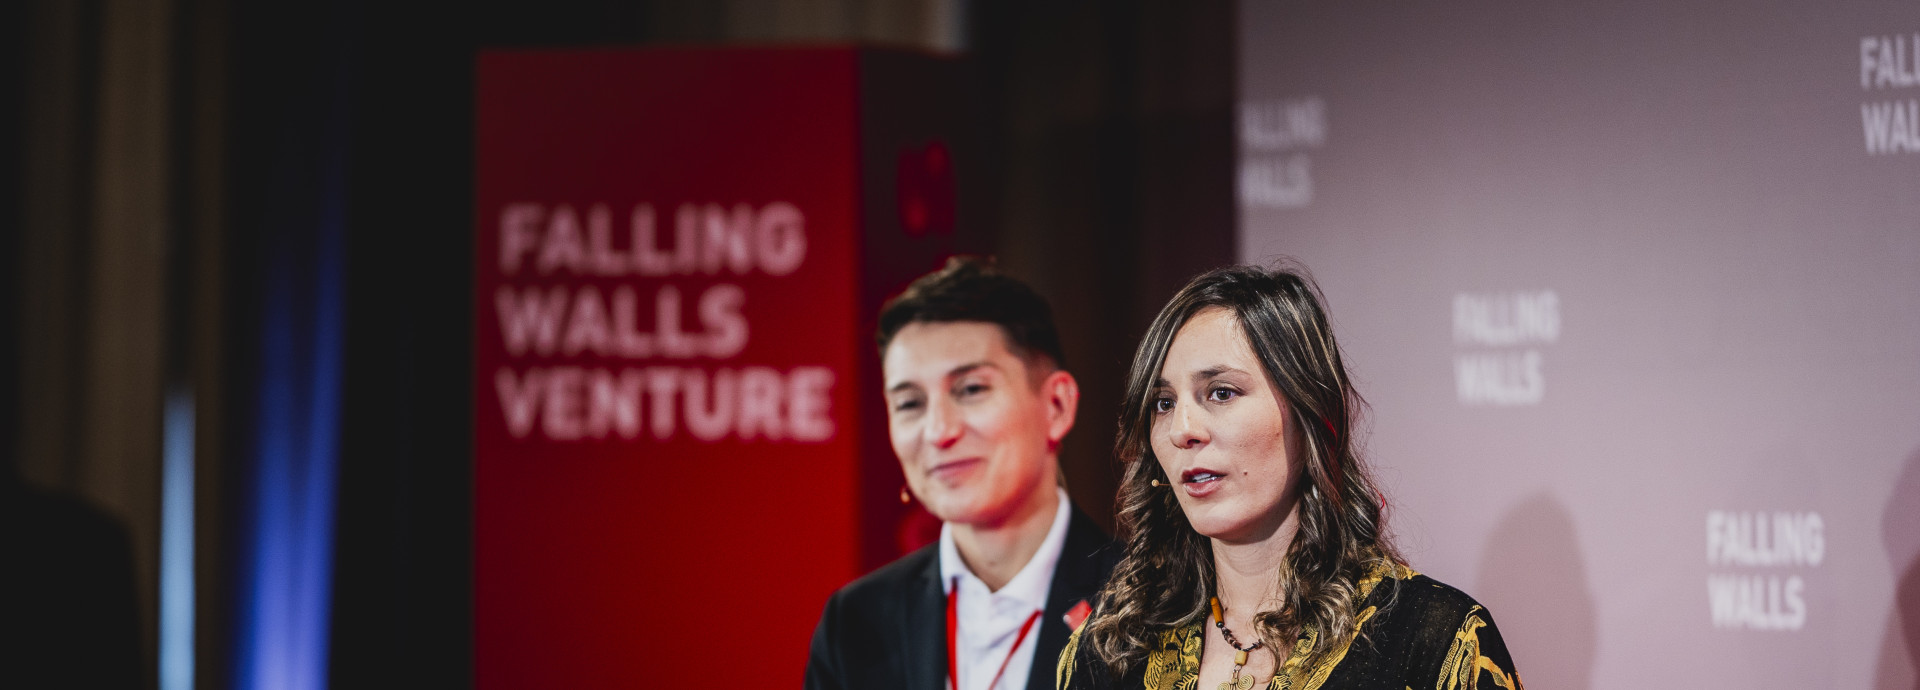 Falling Walls Venture Pitch on Stage at Science Summit 2023